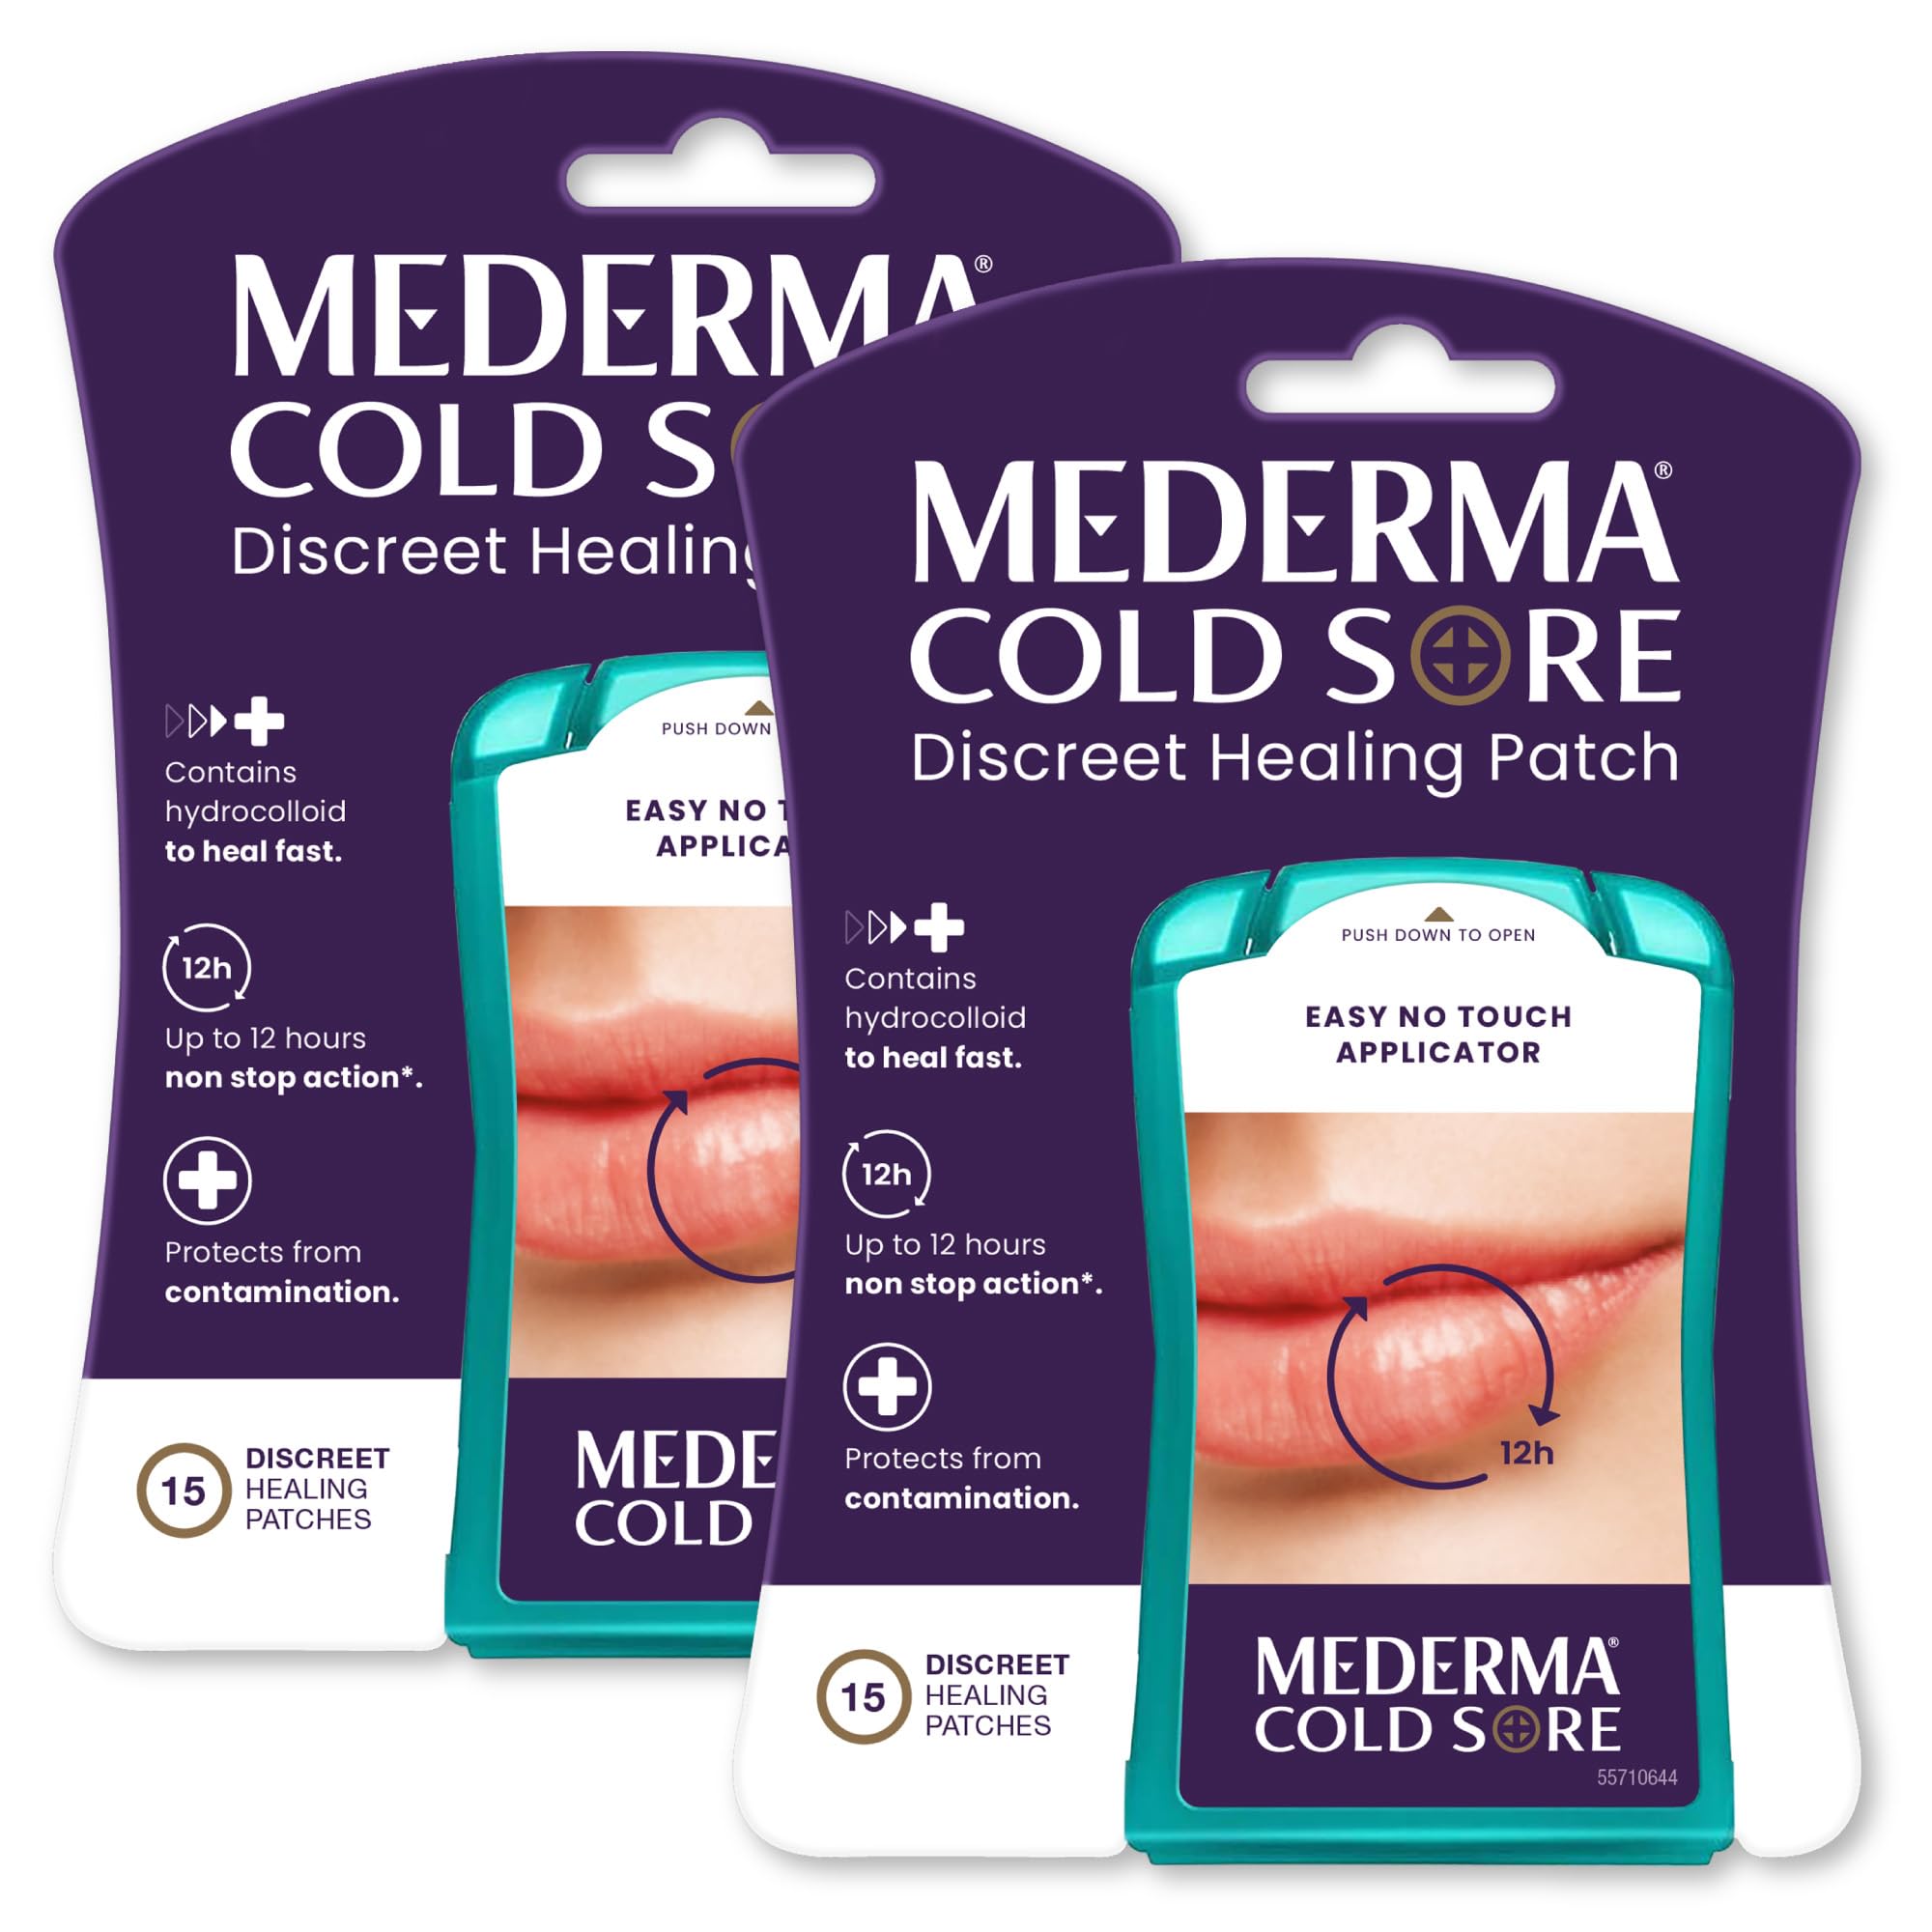 Mederma Discreet Cold Sore Healing Patch - Twin Pack to Protect and Conceal Cold & Abreva 10 Percent Docosanol Cold Sore Treatment, Treats Your Fever Blister in 2.5 Days